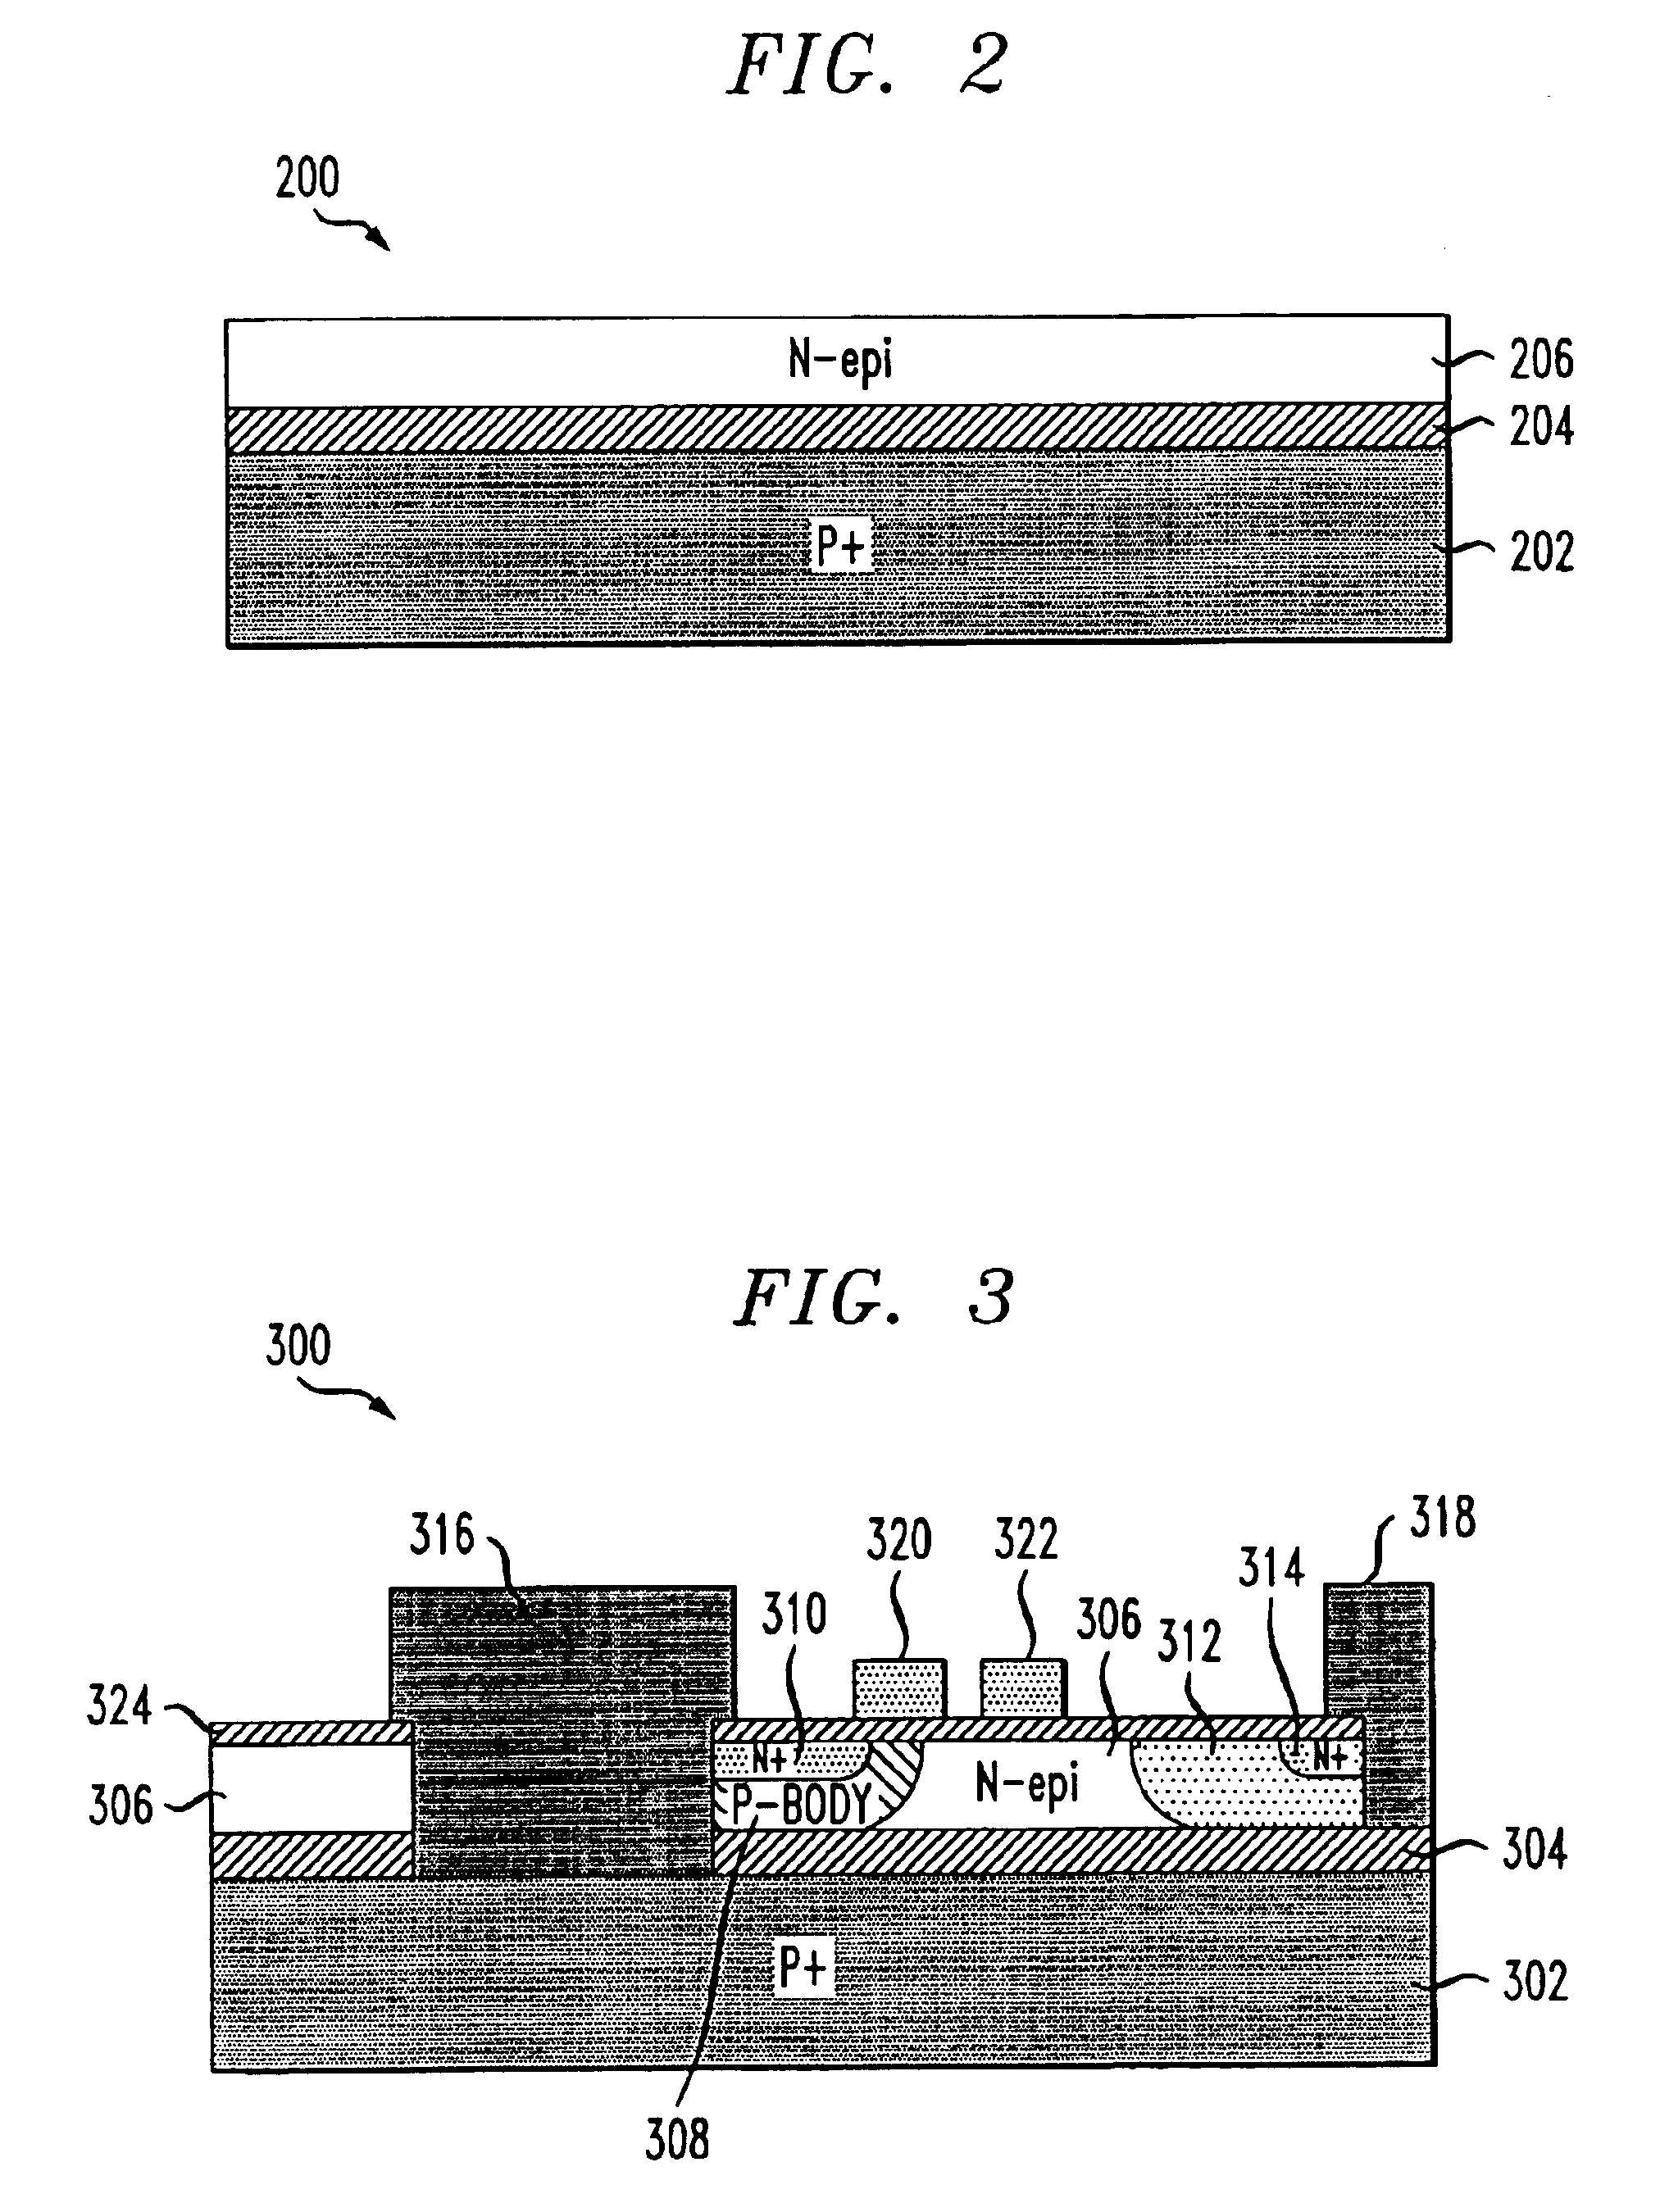 Metal-oxide-semiconductor device formed in silicon-on-insulator